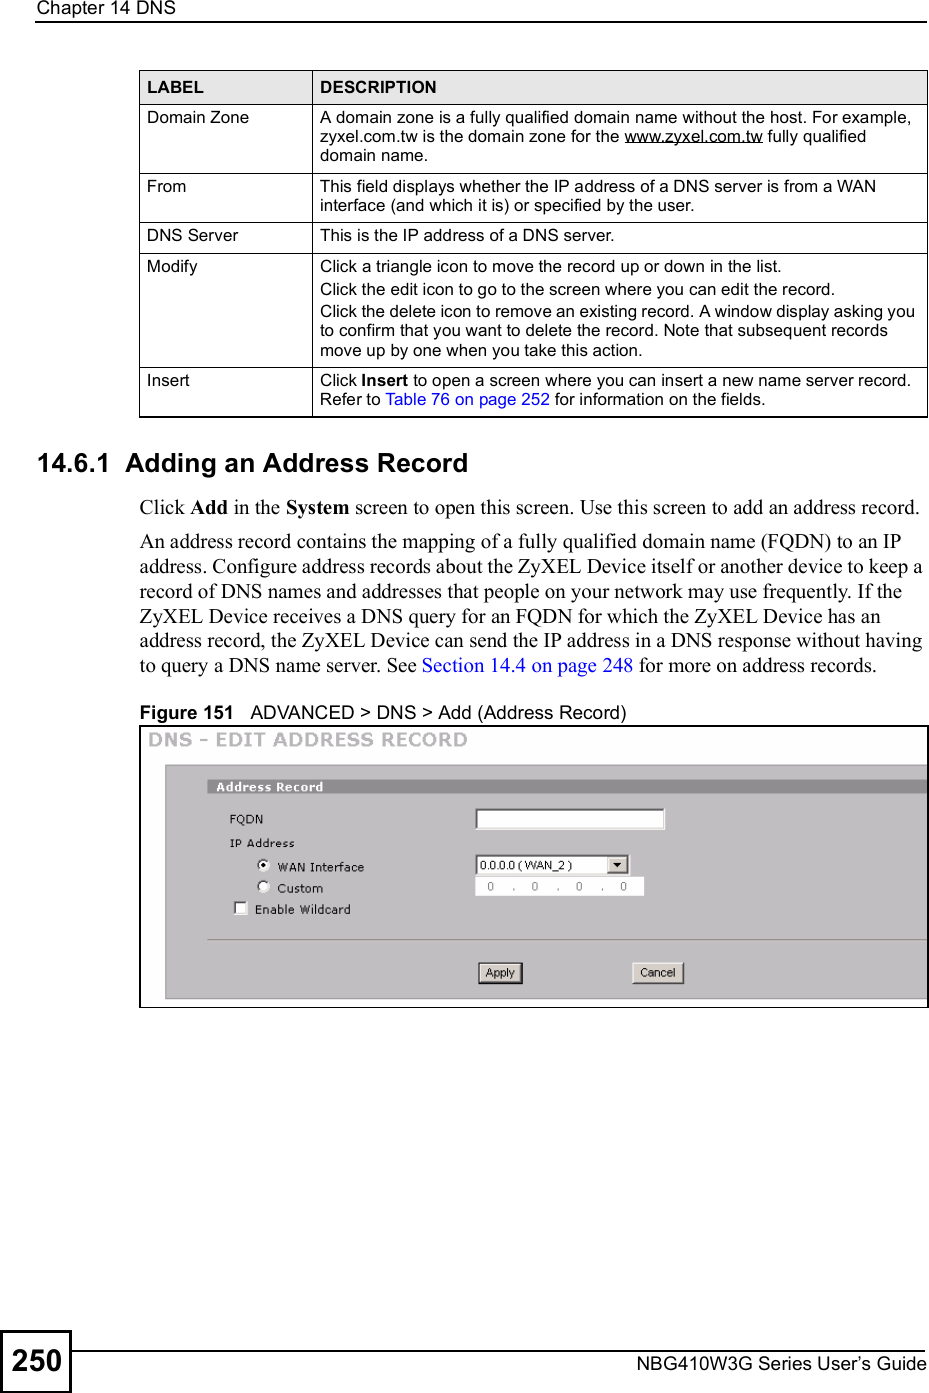 Chapter 14DNSNBG410W3G Series User s Guide25014.6.1  Adding an Address Record  Click Add in the System screen to open this screen. Use this screen to add an address record.An address record contains the mapping of a fully qualified domain name (FQDN) to an IP address. Configure address records about the ZyXEL Device itself or another device to keep a record of DNS names and addresses that people on your network may use frequently. If the ZyXEL Device receives a DNS query for an FQDN for which the ZyXEL Device has an address record, the ZyXEL Device can send the IP address in a DNS response without having to query a DNS name server. See Section 14.4 on page 248 for more on address records.Figure 151   ADVANCED &gt; DNS &gt; Add (Address Record)Domain ZoneA domain zone is a fully qualified domain name without the host. For example, zyxel.com.tw is the domain zone for the www.zyxel.com.tw fully qualified domain name. FromThis field displays whether the IP address of a DNS server is from a WAN interface (and which it is) or specified by the user. DNS ServerThis is the IP address of a DNS server.ModifyClick a triangle icon to move the record up or down in the list. Click the edit icon to go to the screen where you can edit the record.Click the delete icon to remove an existing record. A window display asking you to confirm that you want to delete the record. Note that subsequent records move up by one when you take this action.InsertClick Insert to open a screen where you can insert a new name server record. Refer to Table 76 on page 252 for information on the fields.LABEL DESCRIPTION